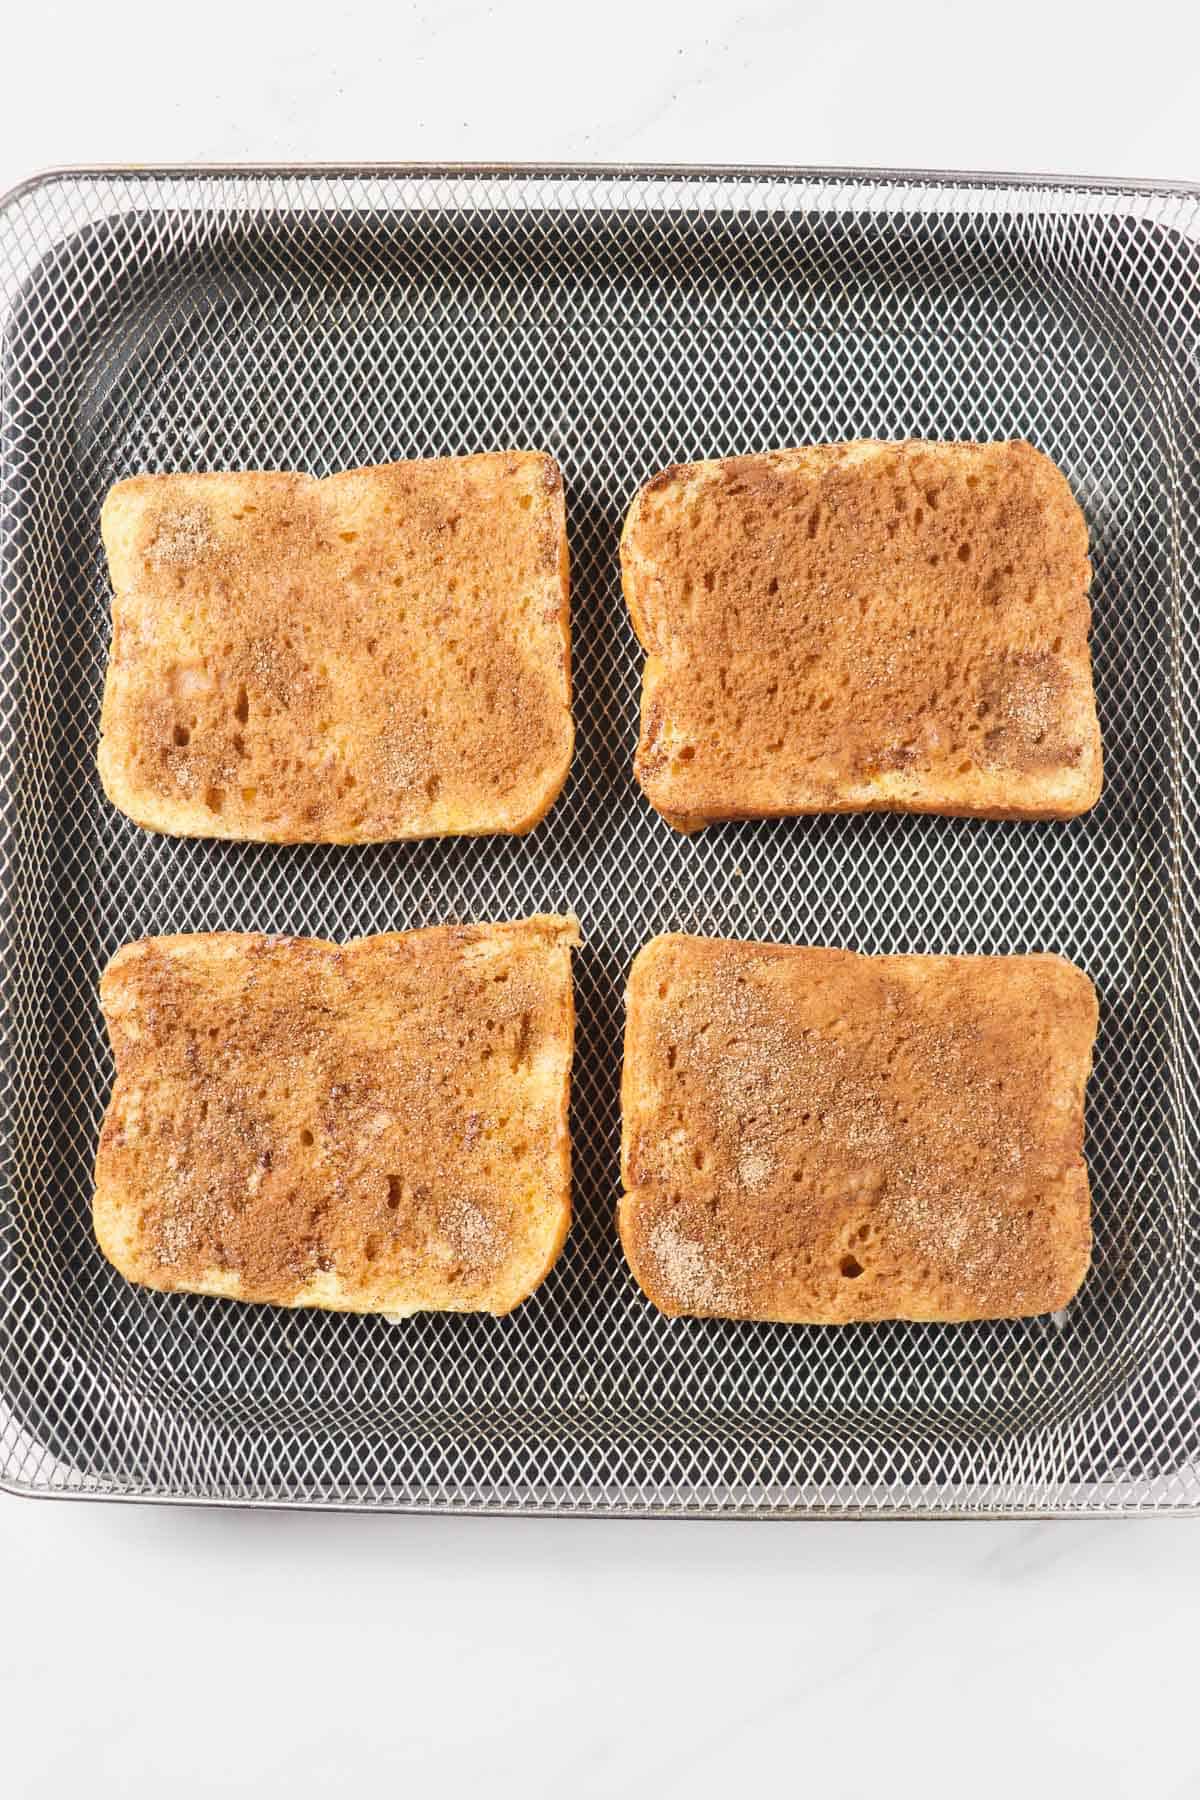 french toast loaded into air fryer basket before baking